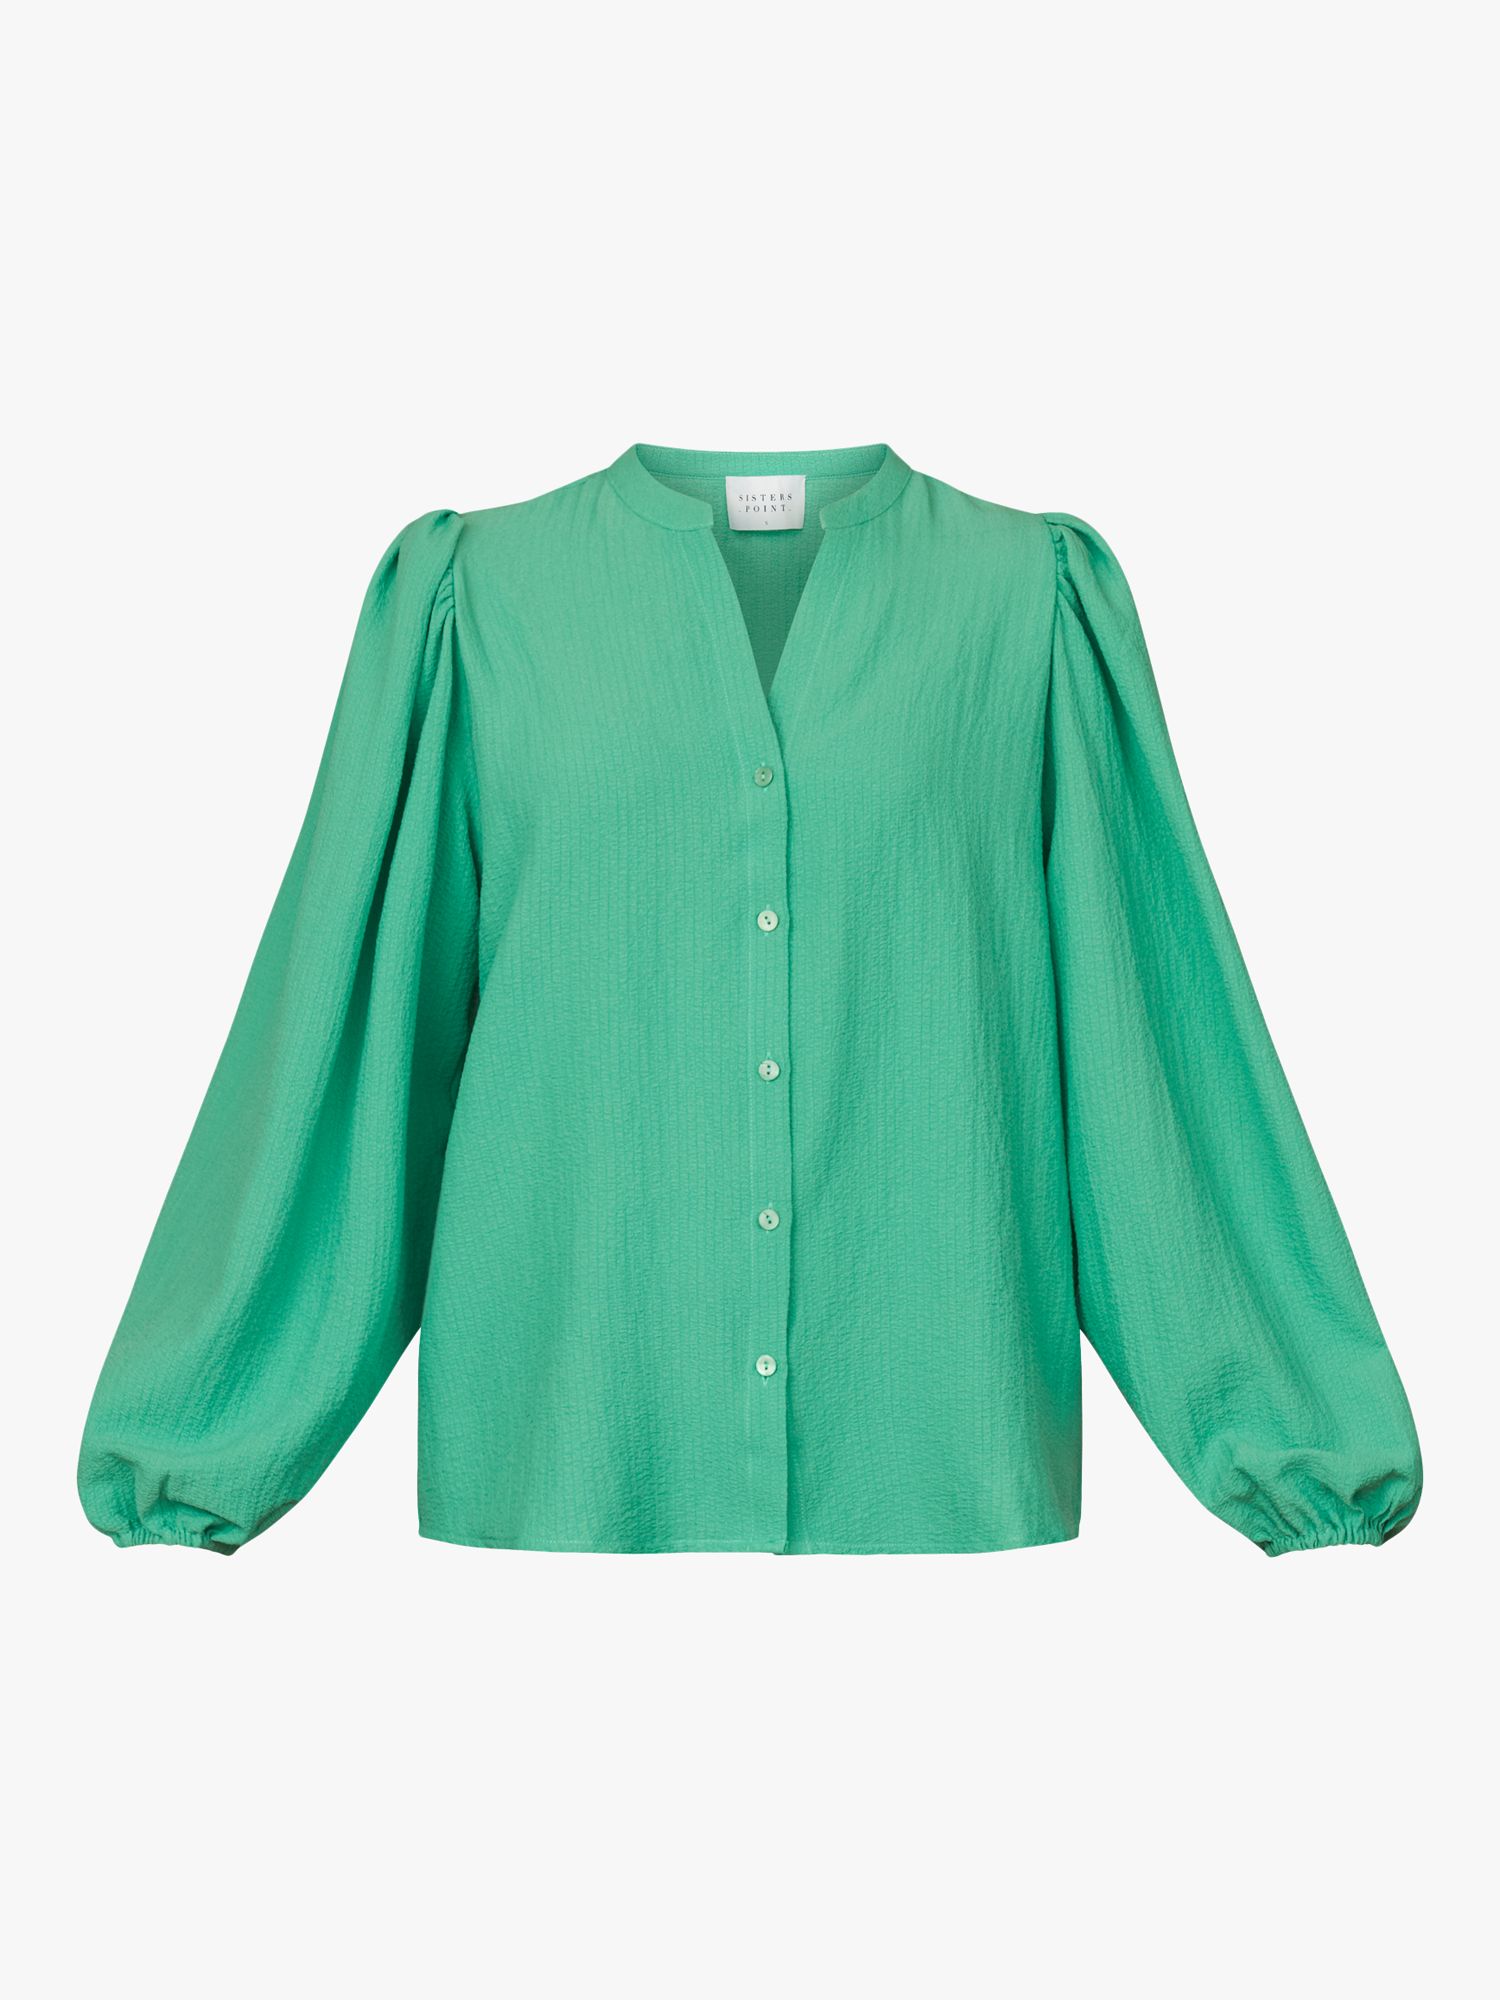 Buy Sisters Point Varia Loose Fitted Soft Shirt, Light Jade Online at johnlewis.com